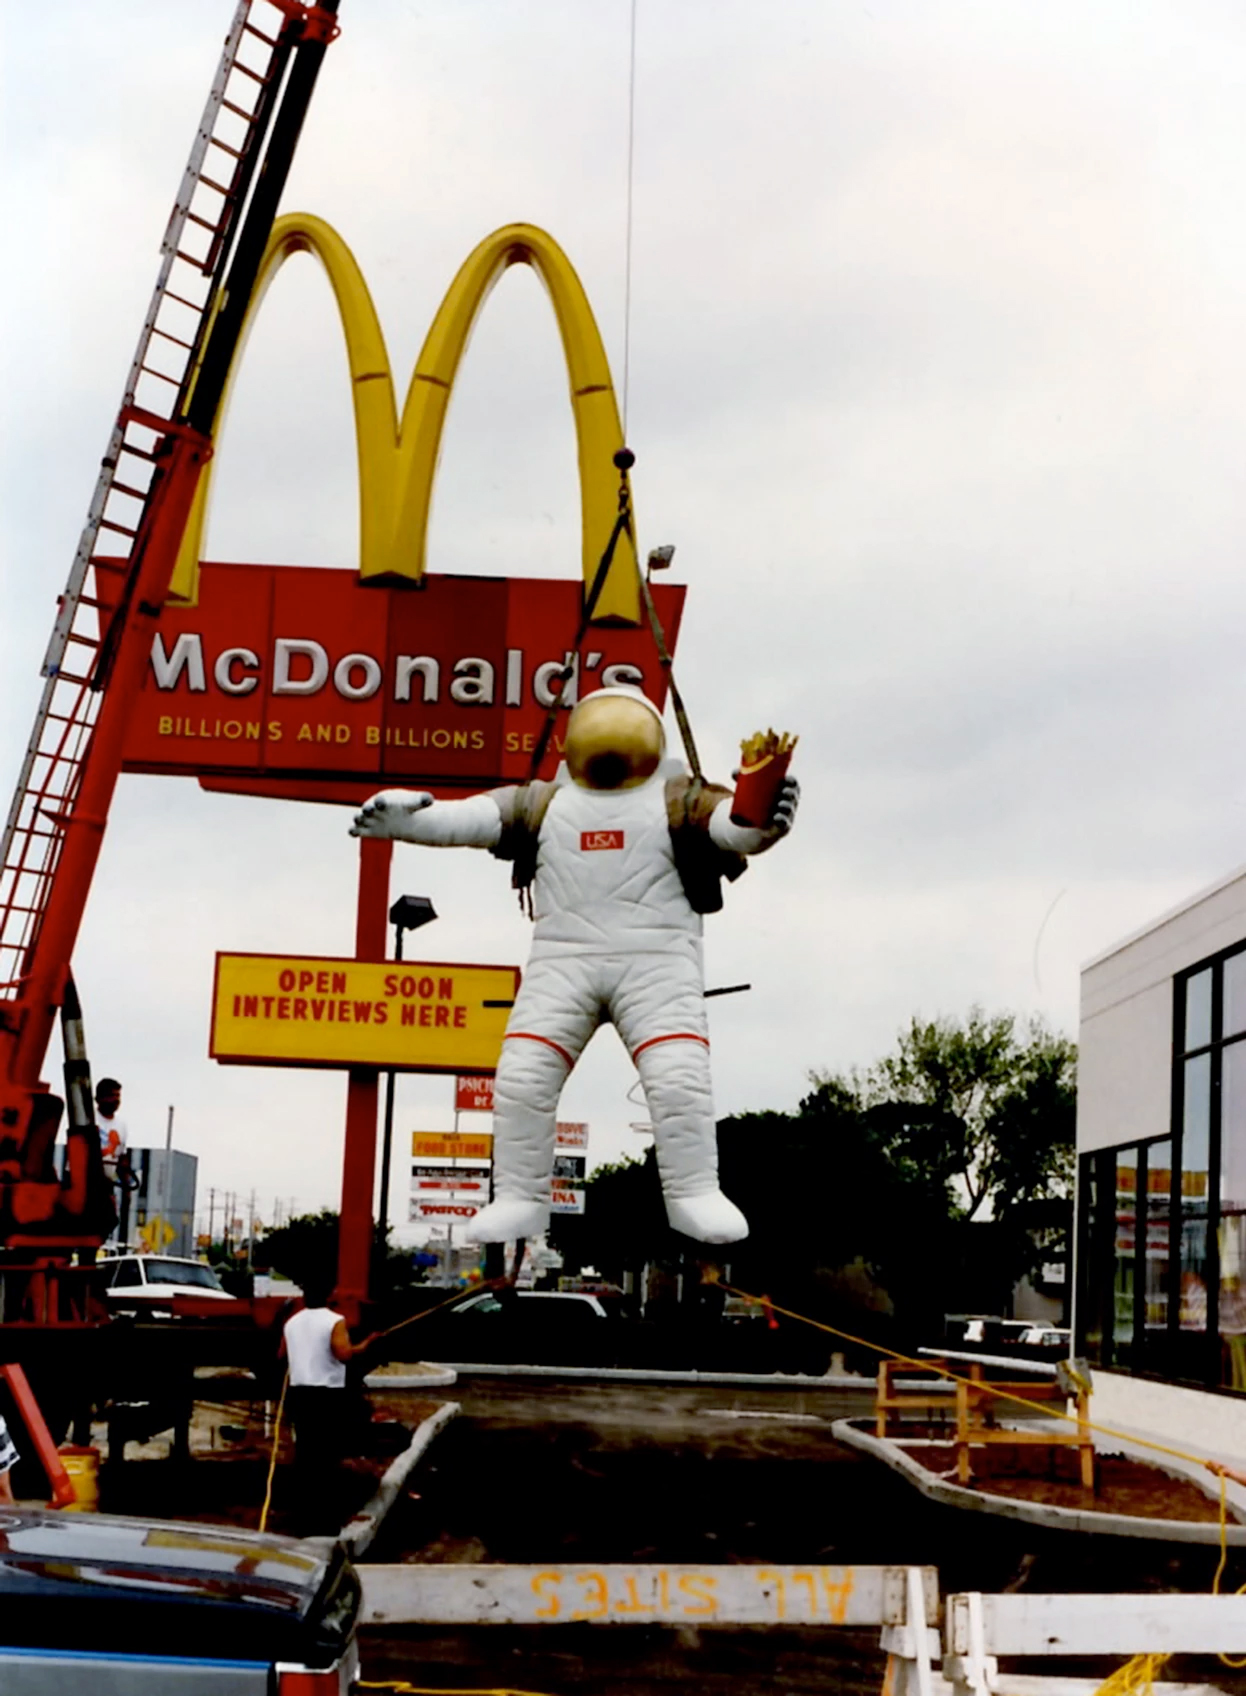 Artist John Knott's original astronaut statue seen being installed in 1995 at the now former McDonald's restaurant on NASA Road 1 in Houston, Texas, near Space Center Houston and NASA's Johnson Space Center.